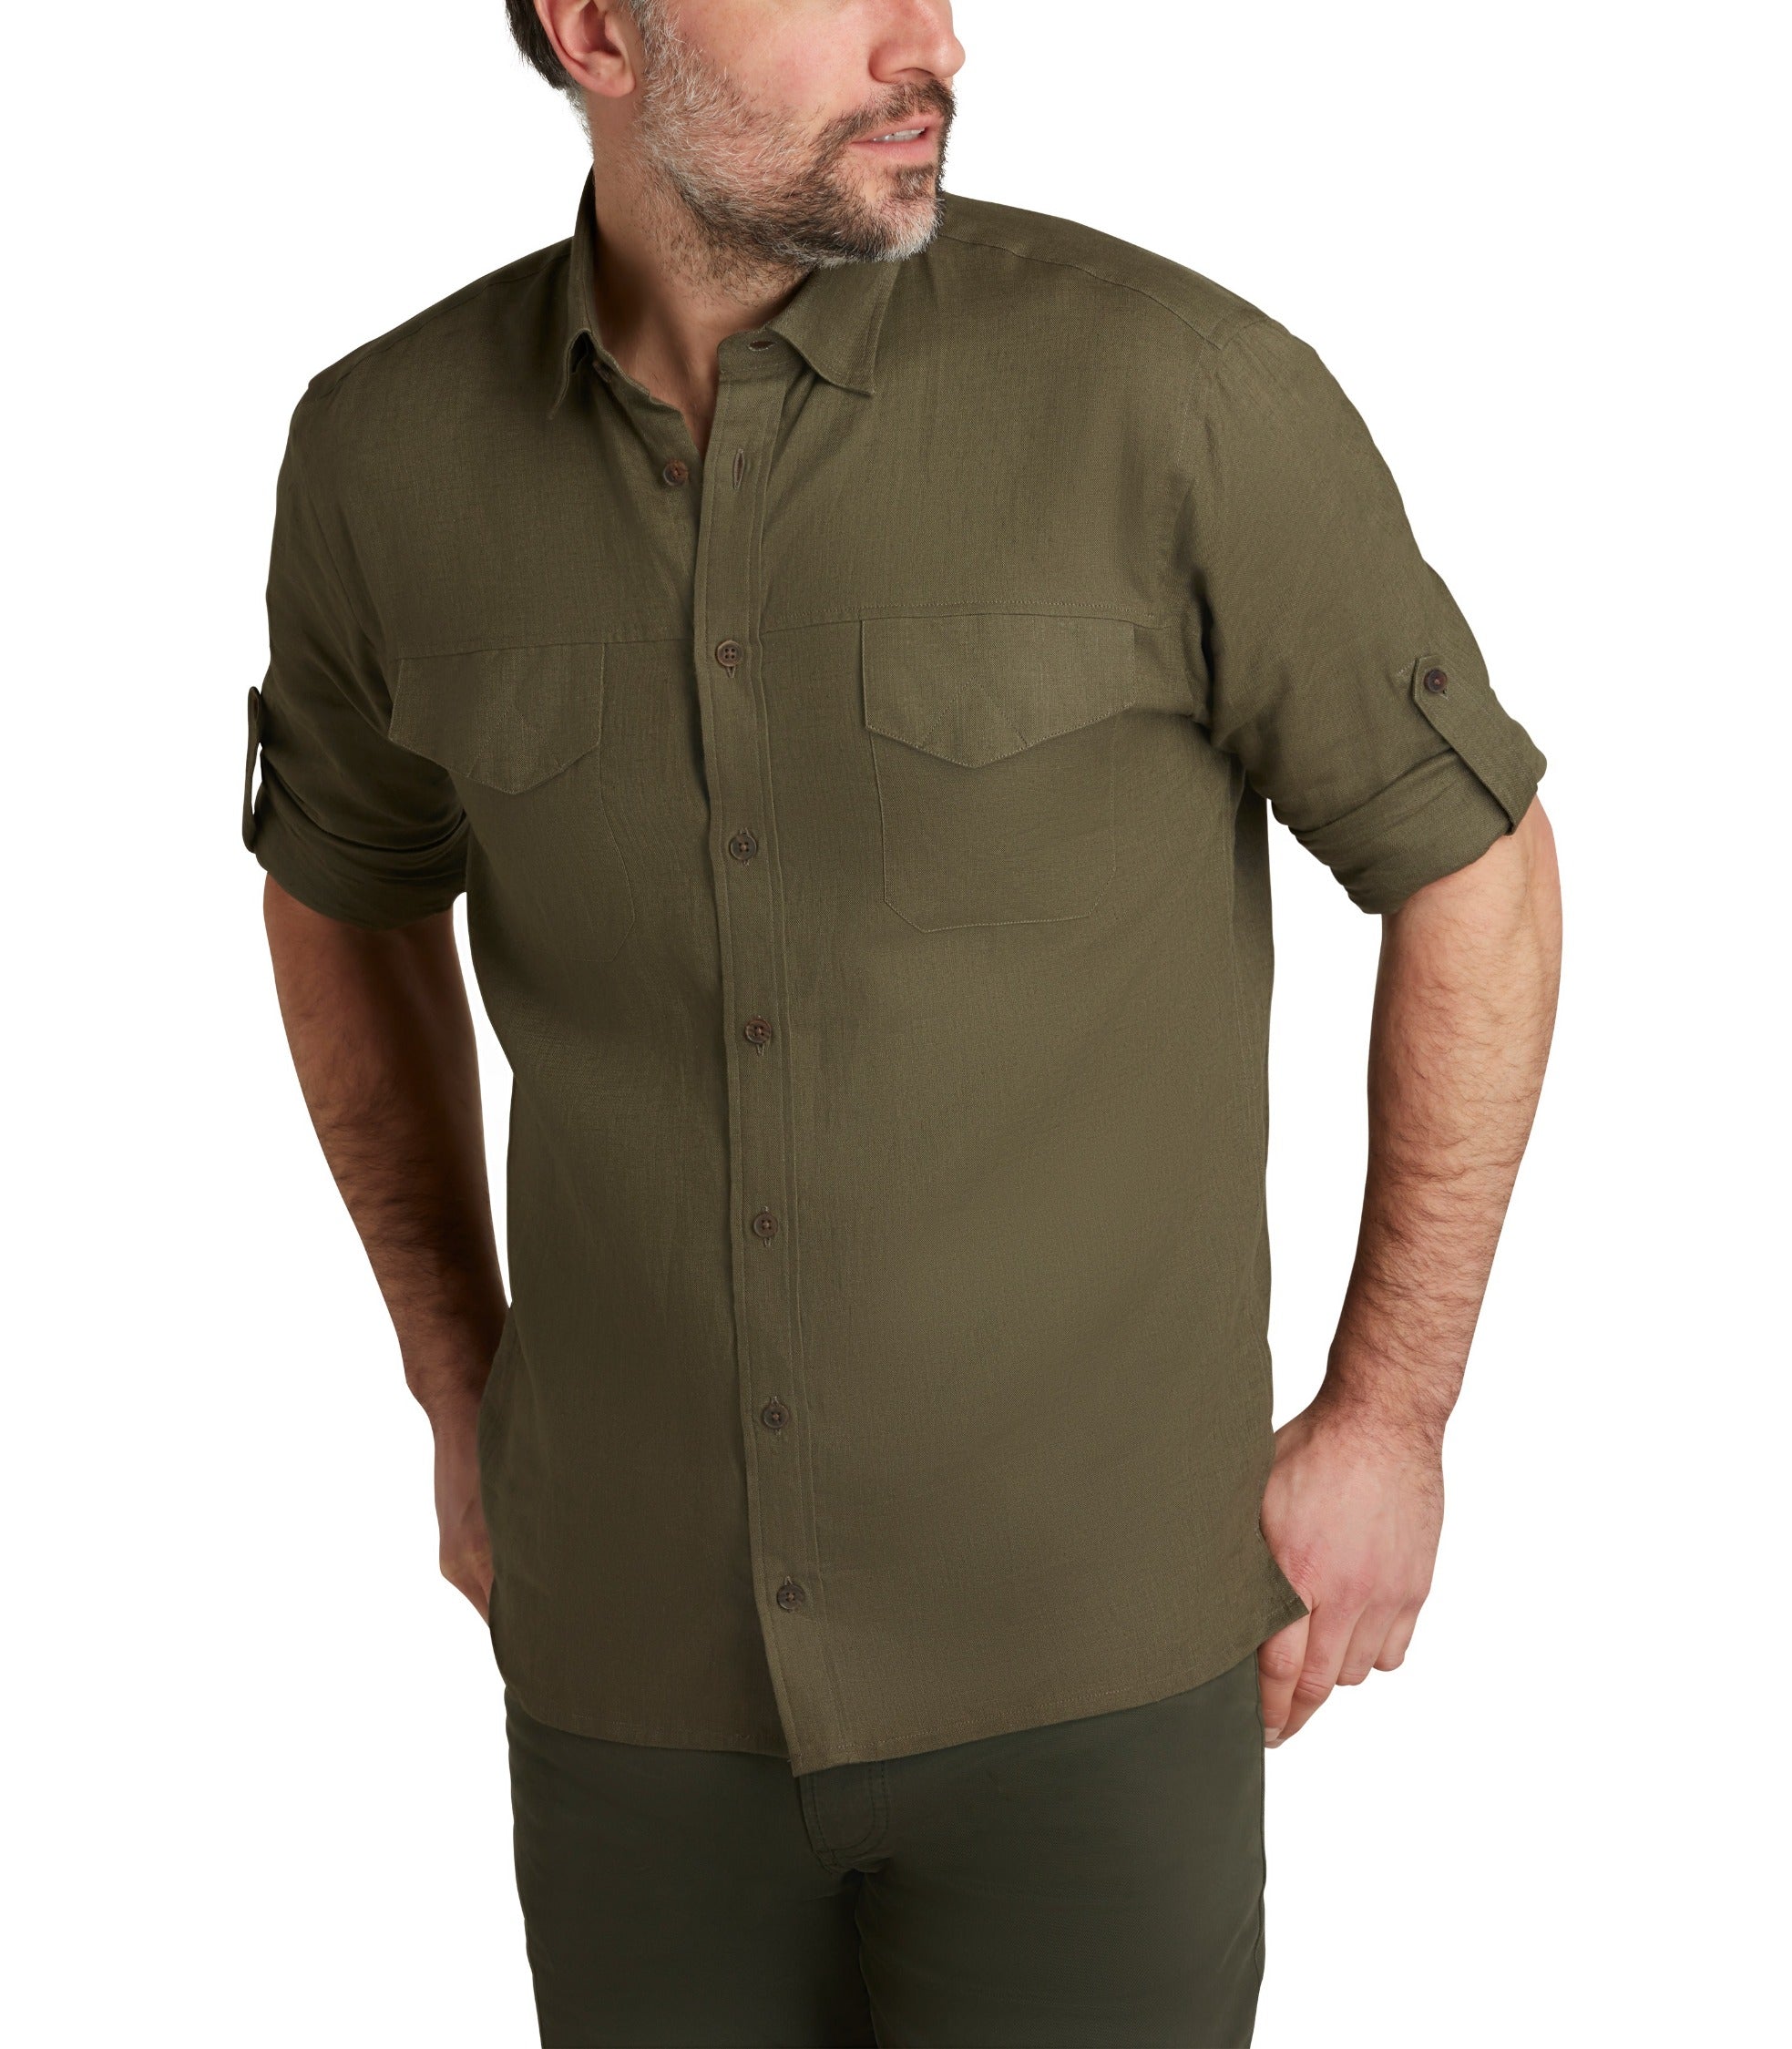 Luca Safari Linen Shirt with French Collar White – Khirzad